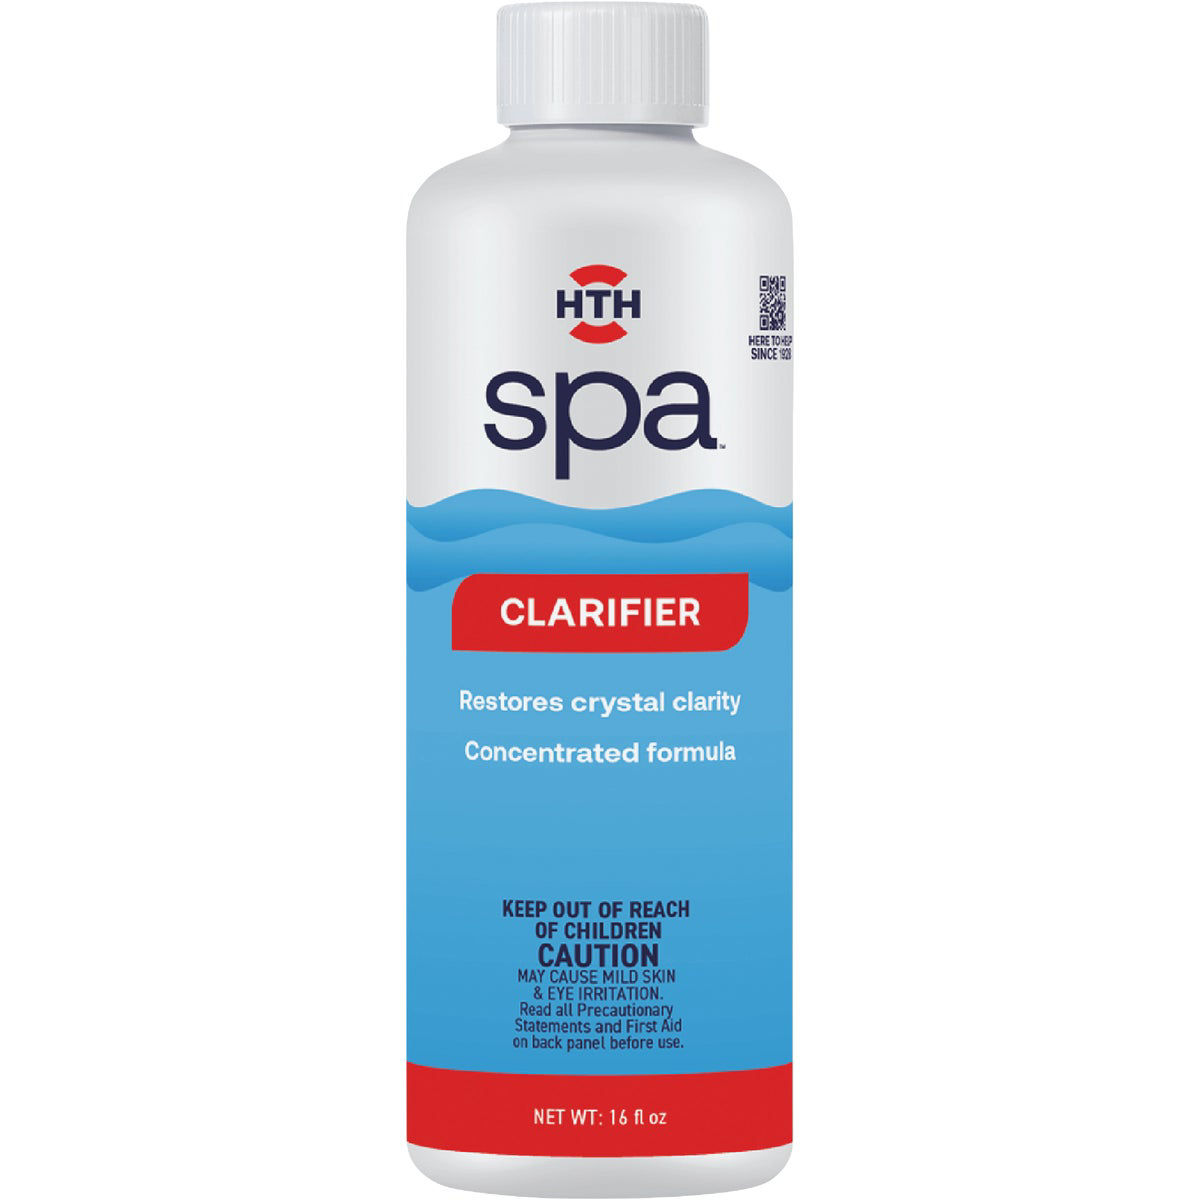 Spa Selections Clarifier for Spa, Hot Tub & Spa Chemicals, 16 oz 